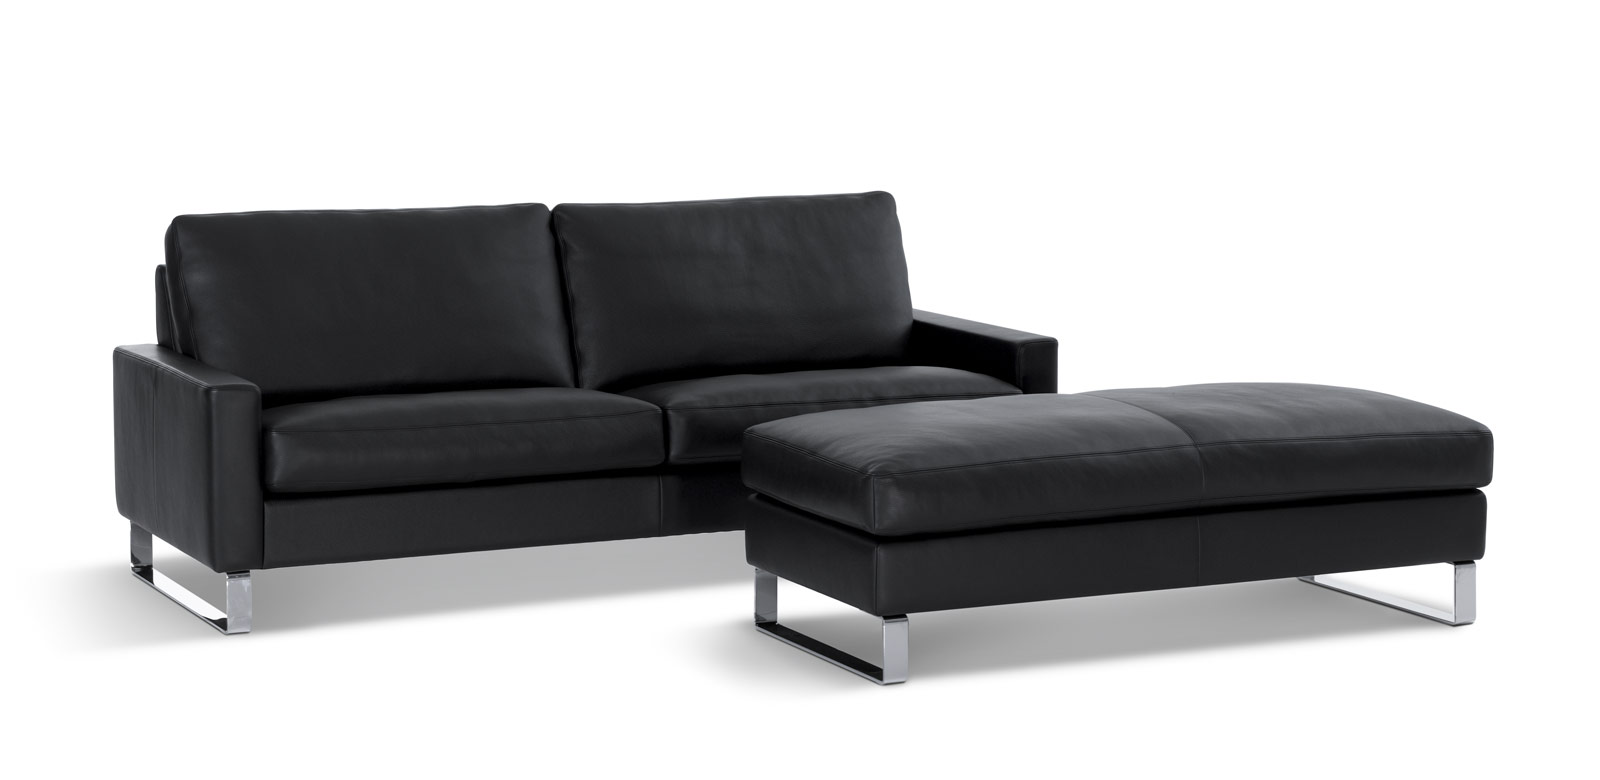 Black leather couch CL500 on runners with matching elongated stool